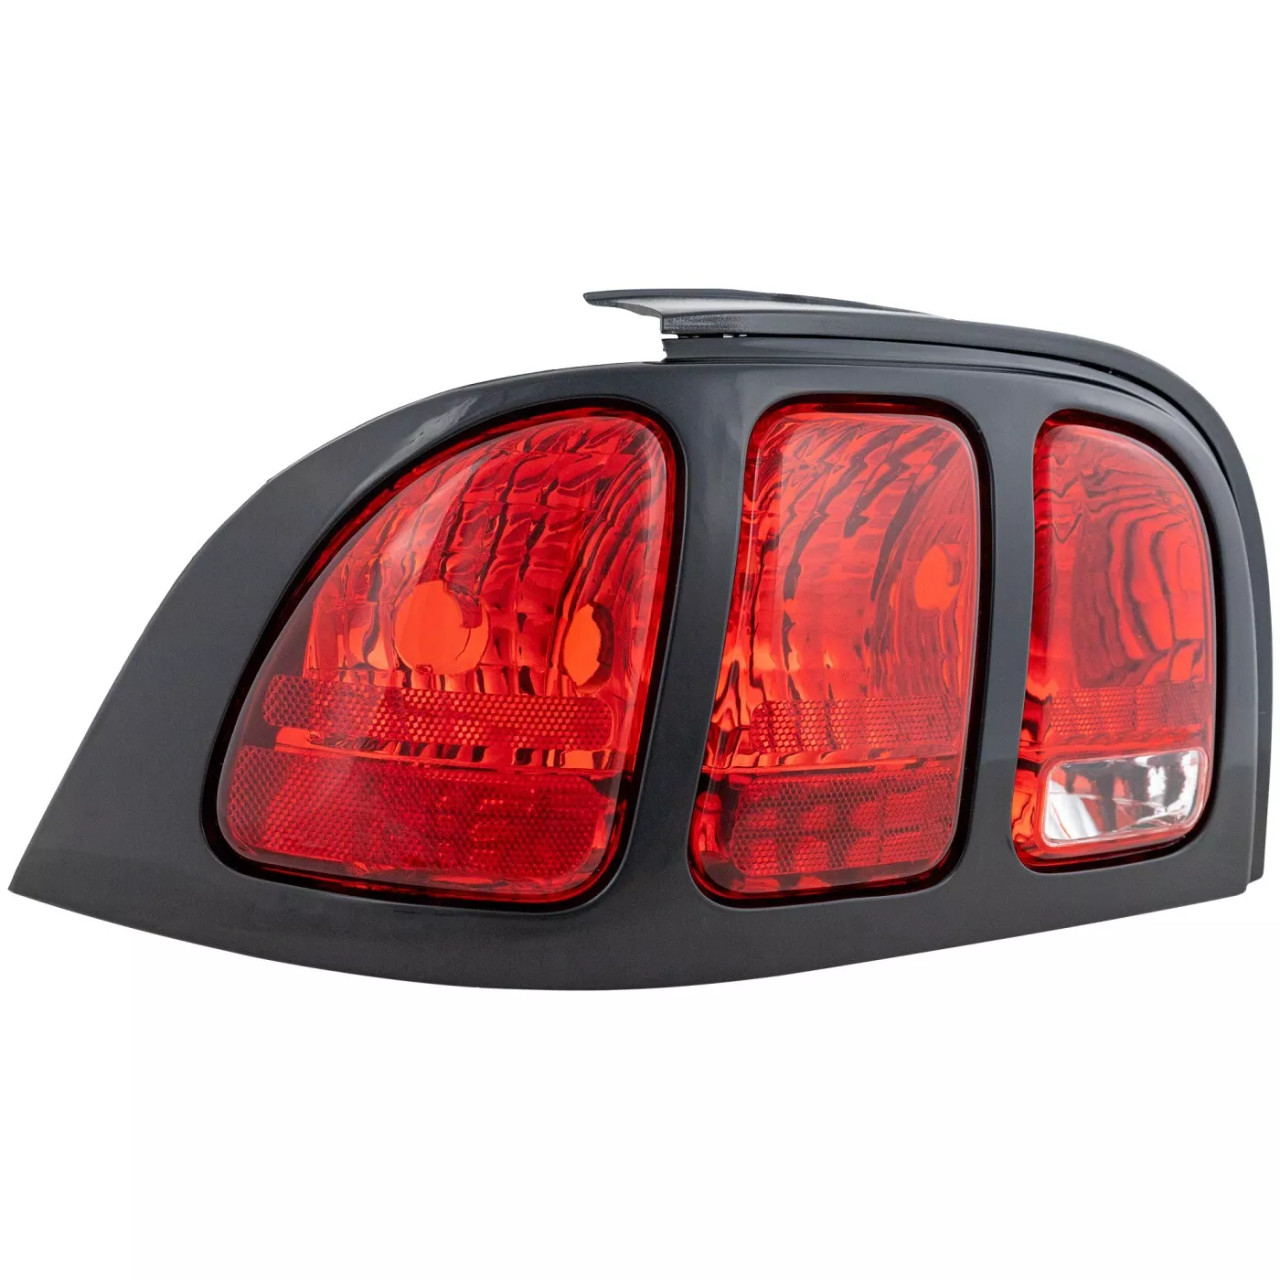 Set of 2 Tail Light For 96-98 Ford Mustang LH & RH Clear & Red Lens